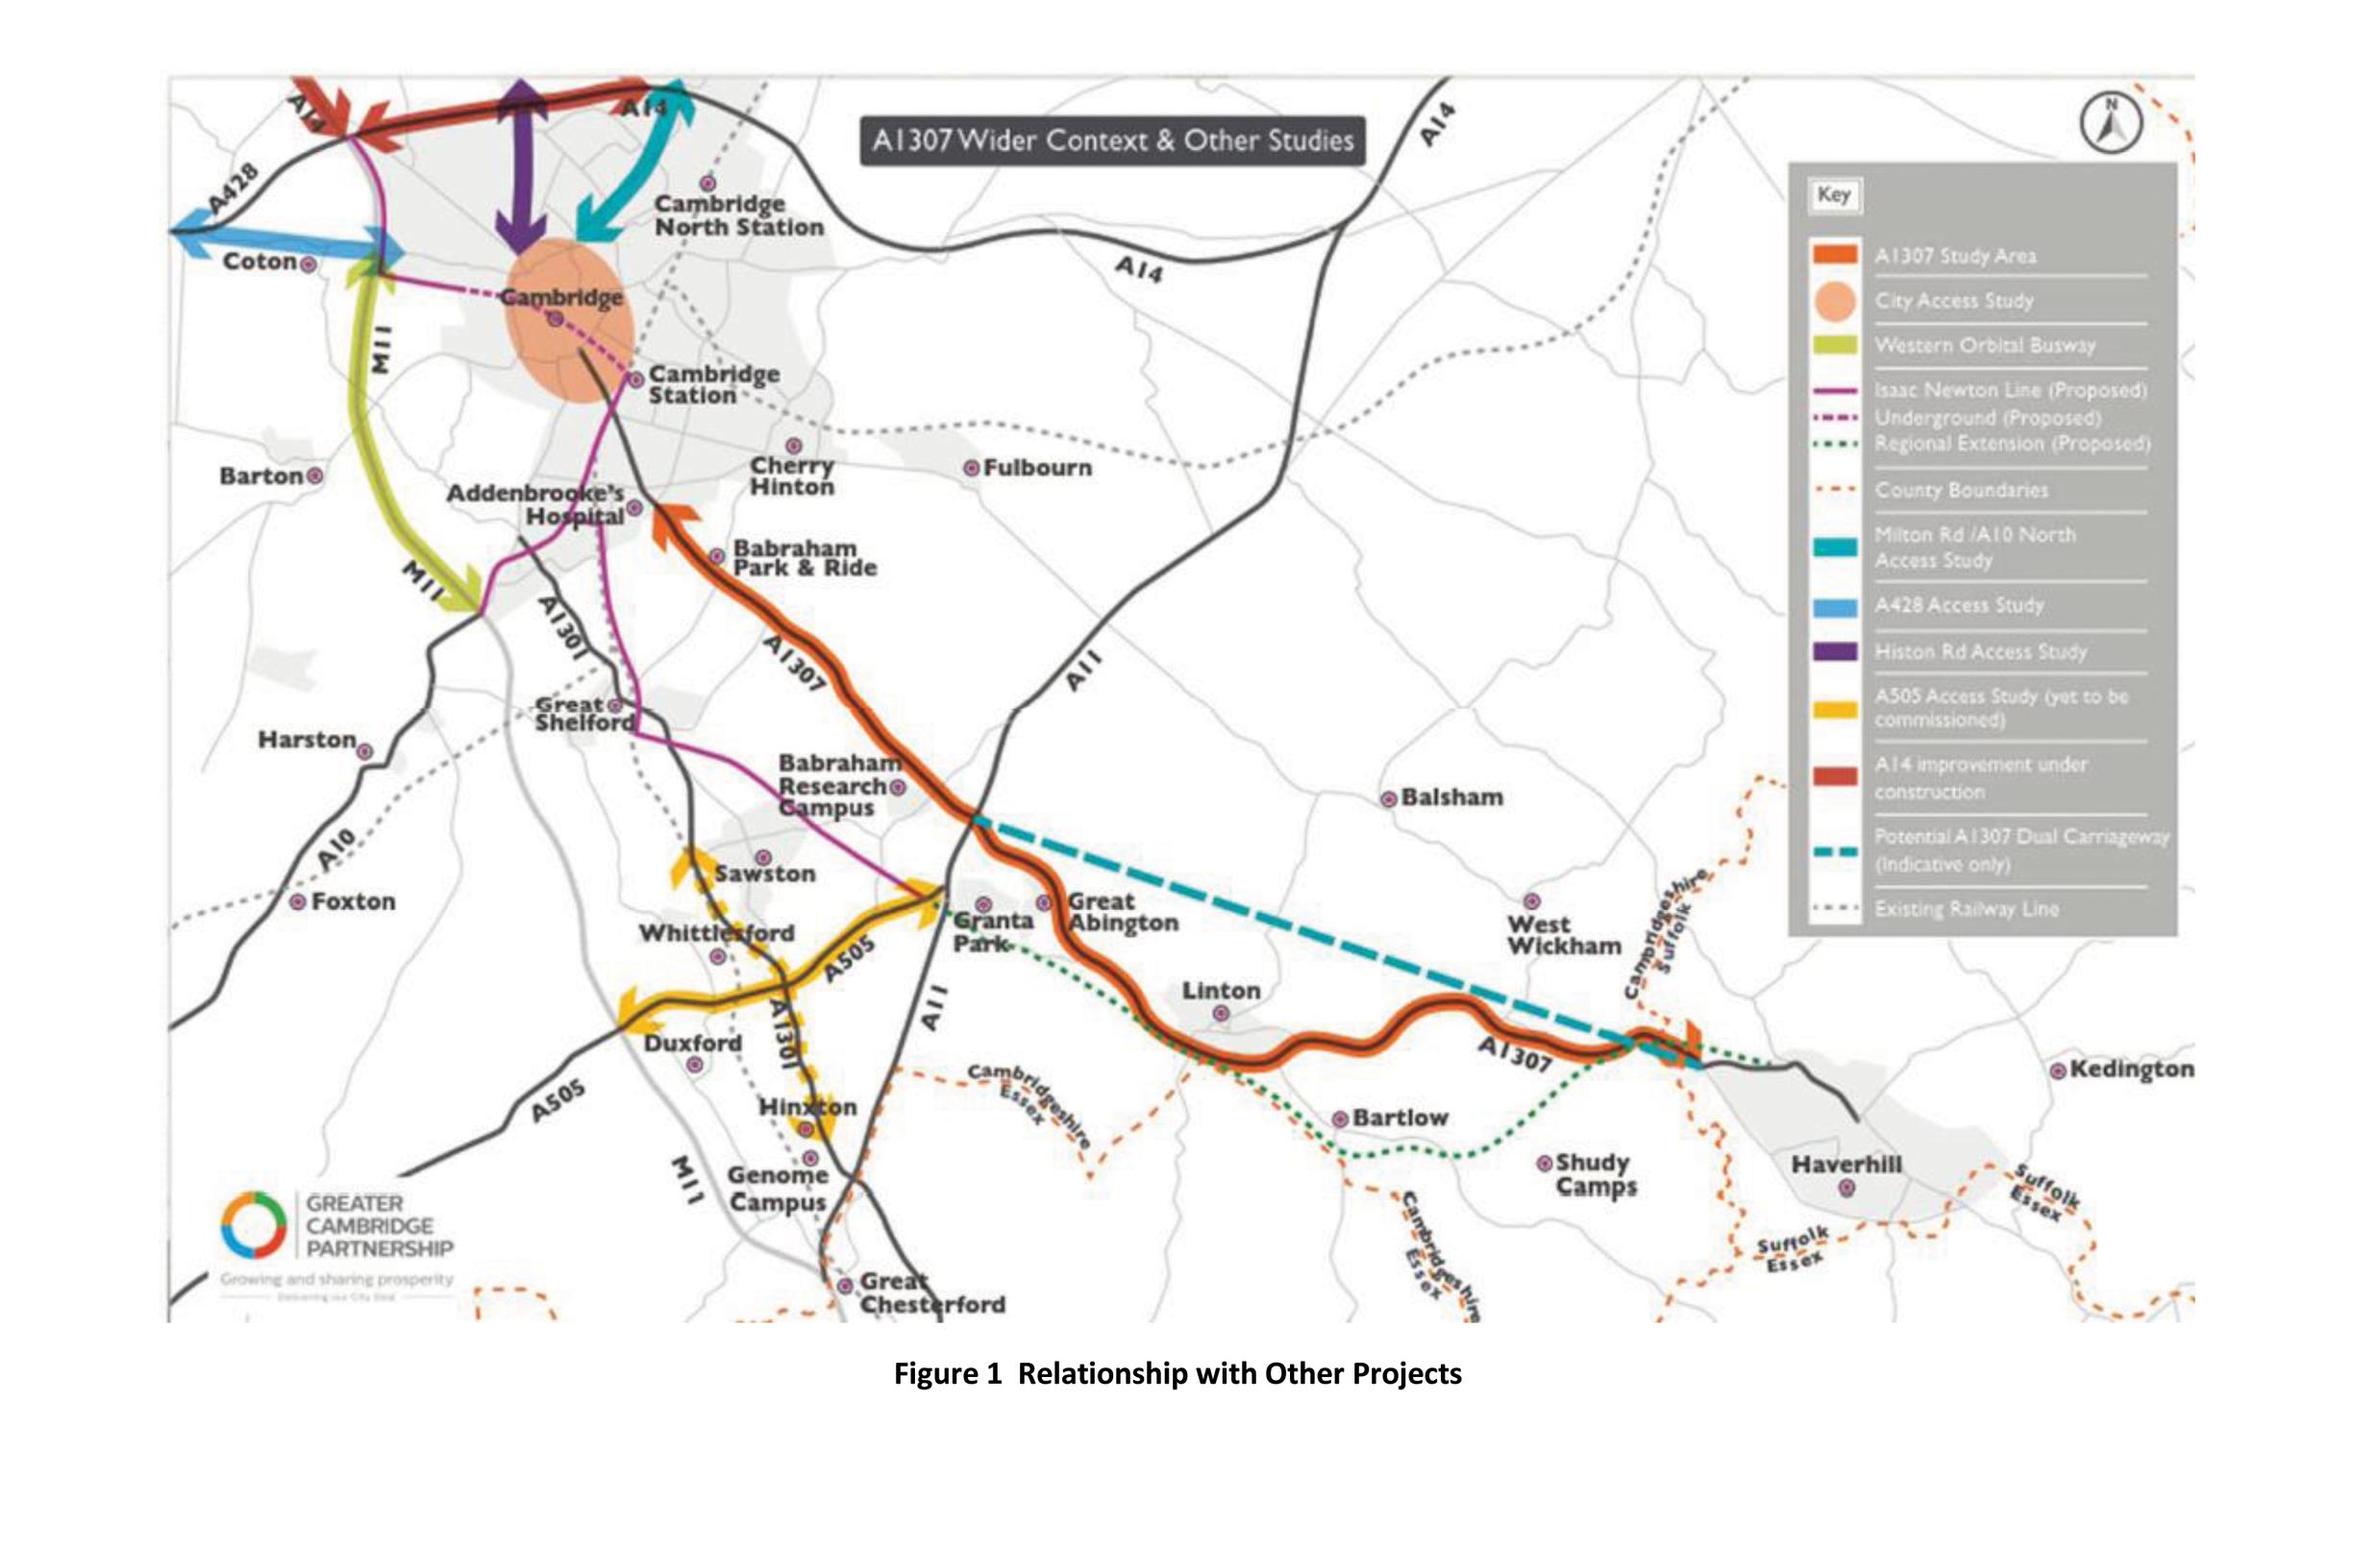 The map shows the A1307 corridor to Haverhill and its relation with other studies in the area. The dotted blue line is an indicative-only illustration of a possible dualling scheme between Haverhill and the A11